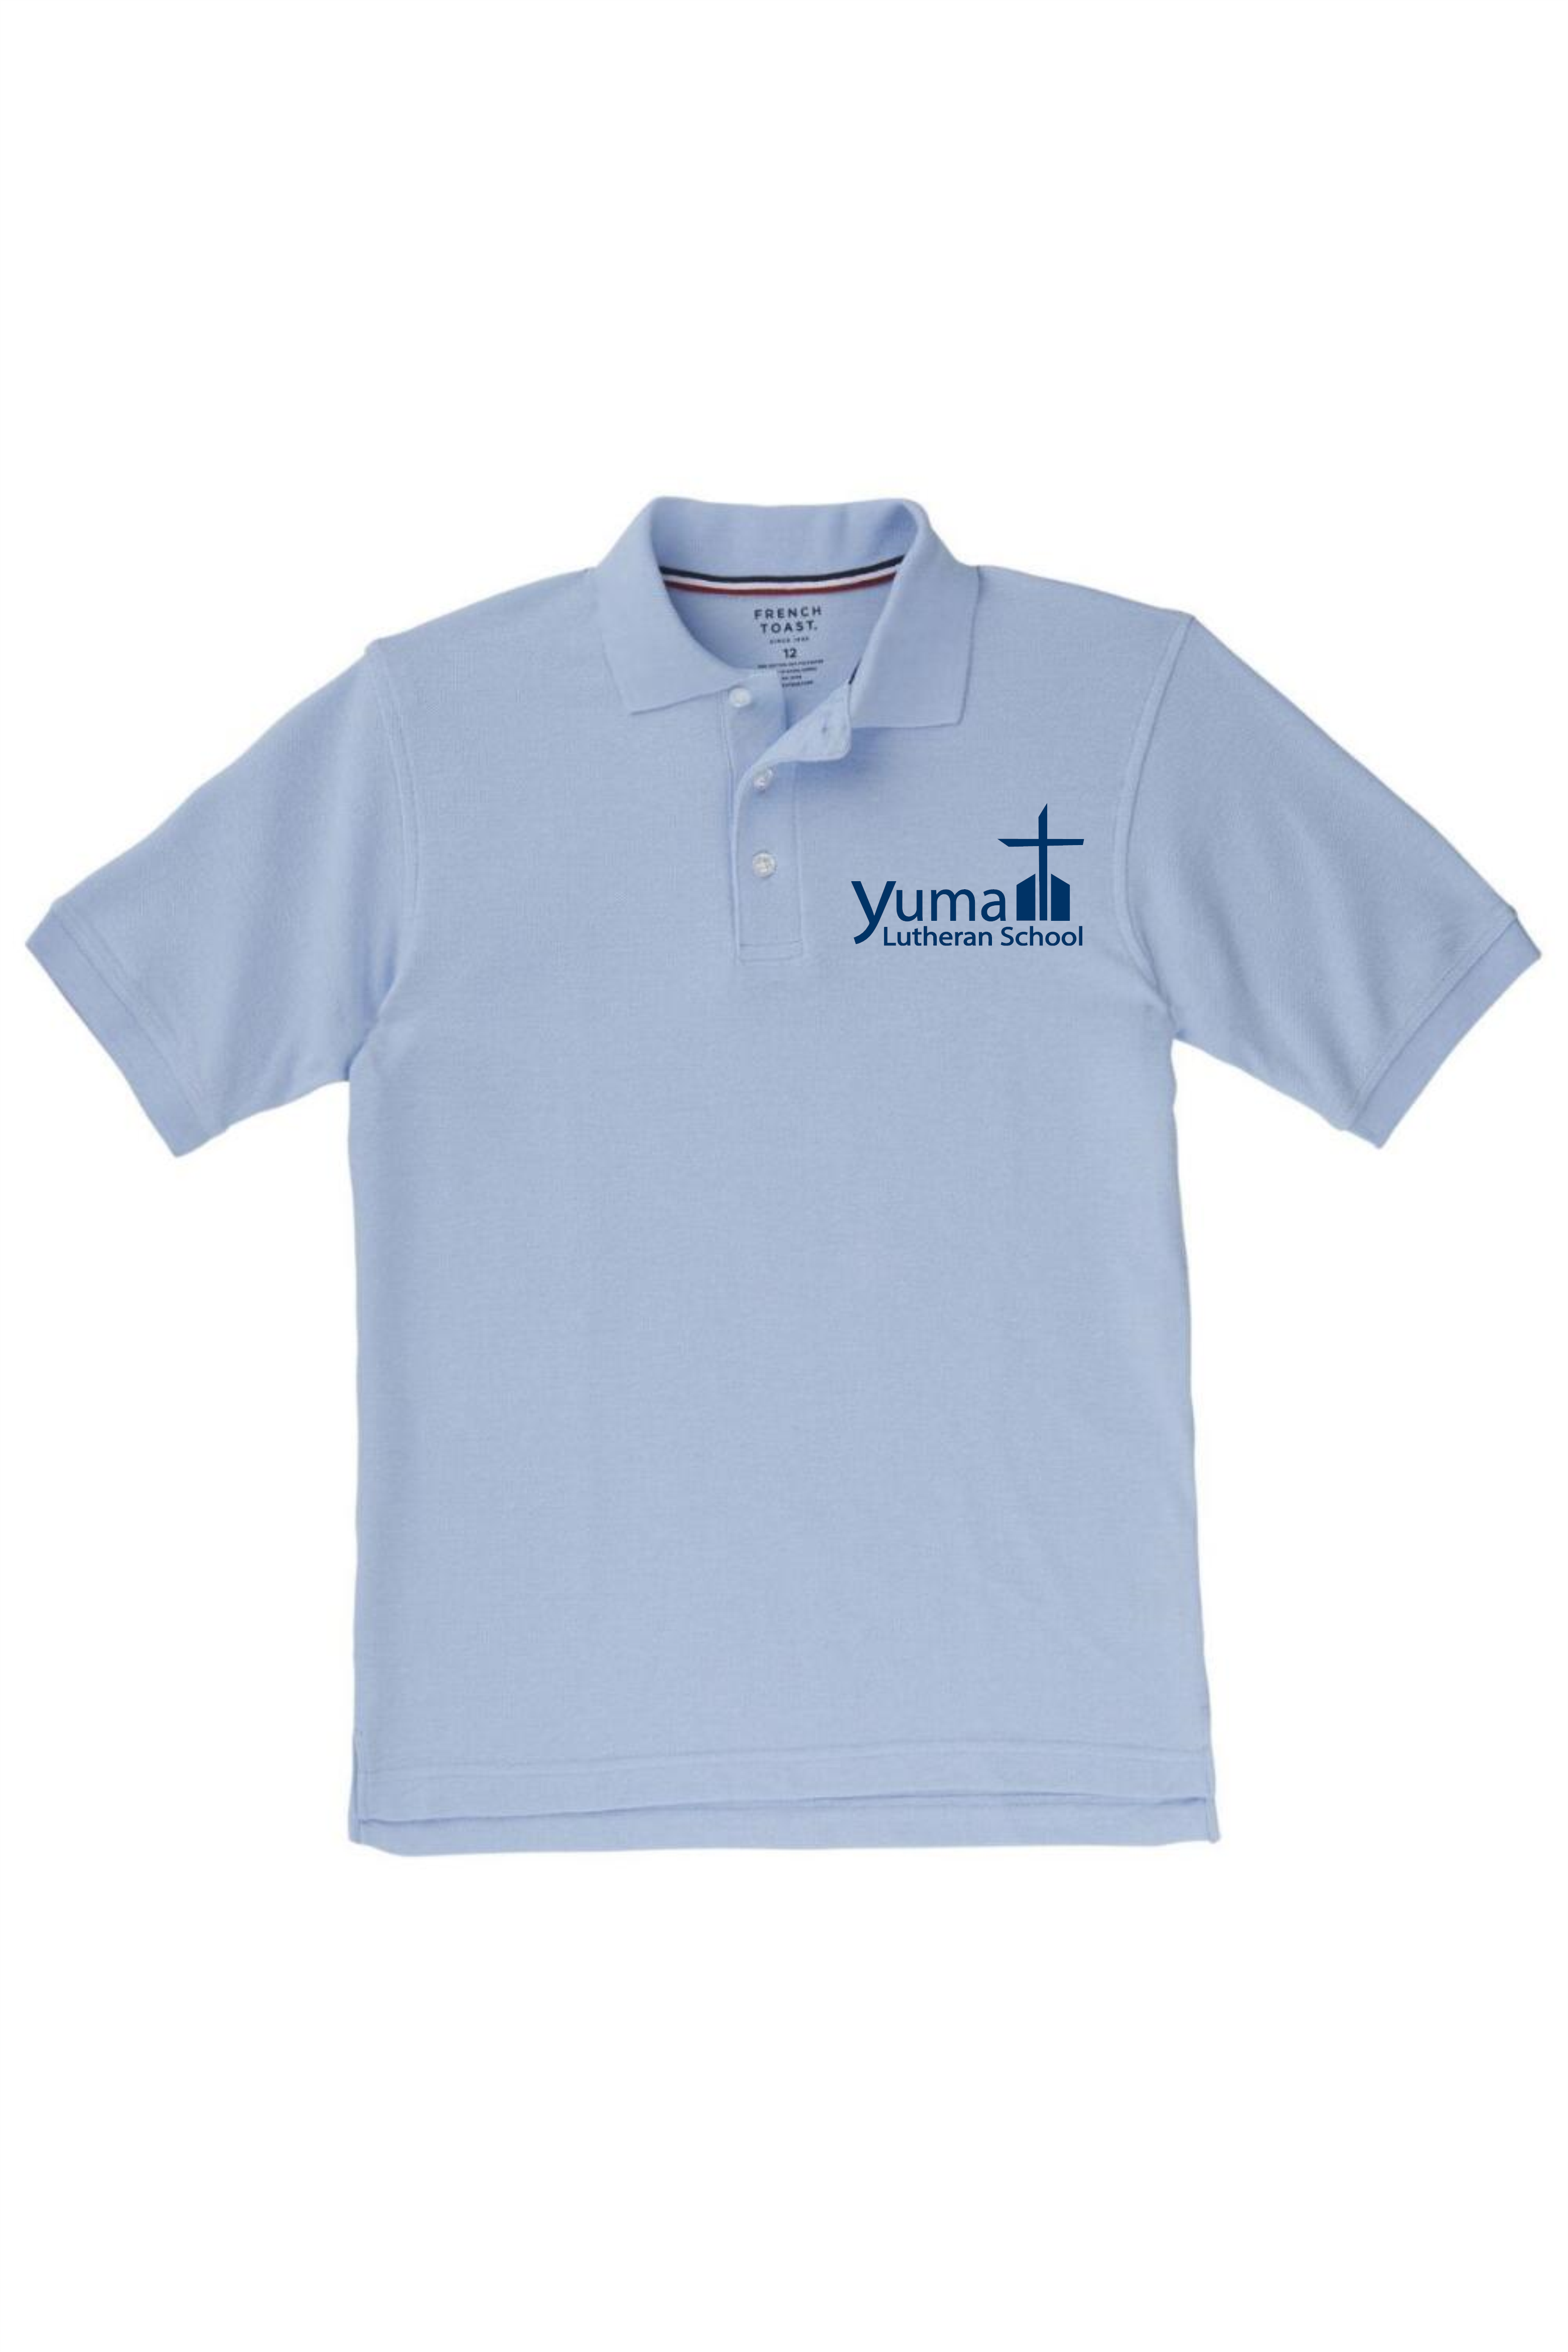 French Toast Boy's Short Sleeve Pique Polo (Polo Size: XS - 4/5, French Toast Polo Color: Lt Blue - YLS)